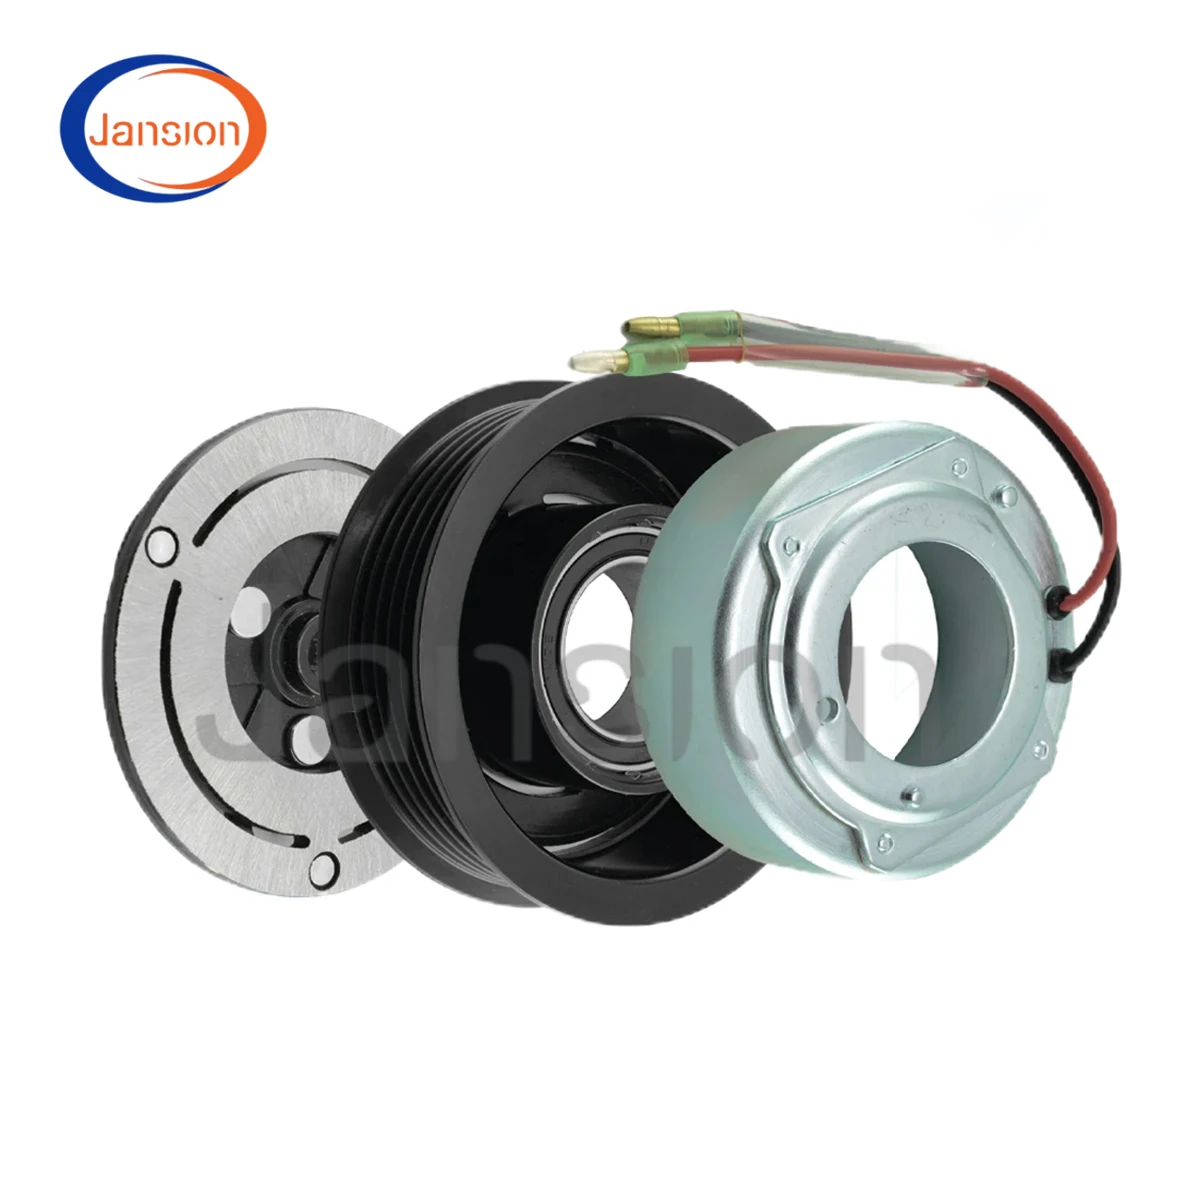 AC A/C Air Conditioning Compressor Clutch Pulley QS90 For CHEVROLET AVEO T300 1.2 1.4 95059818 AKT011H403G AKT200A4408A